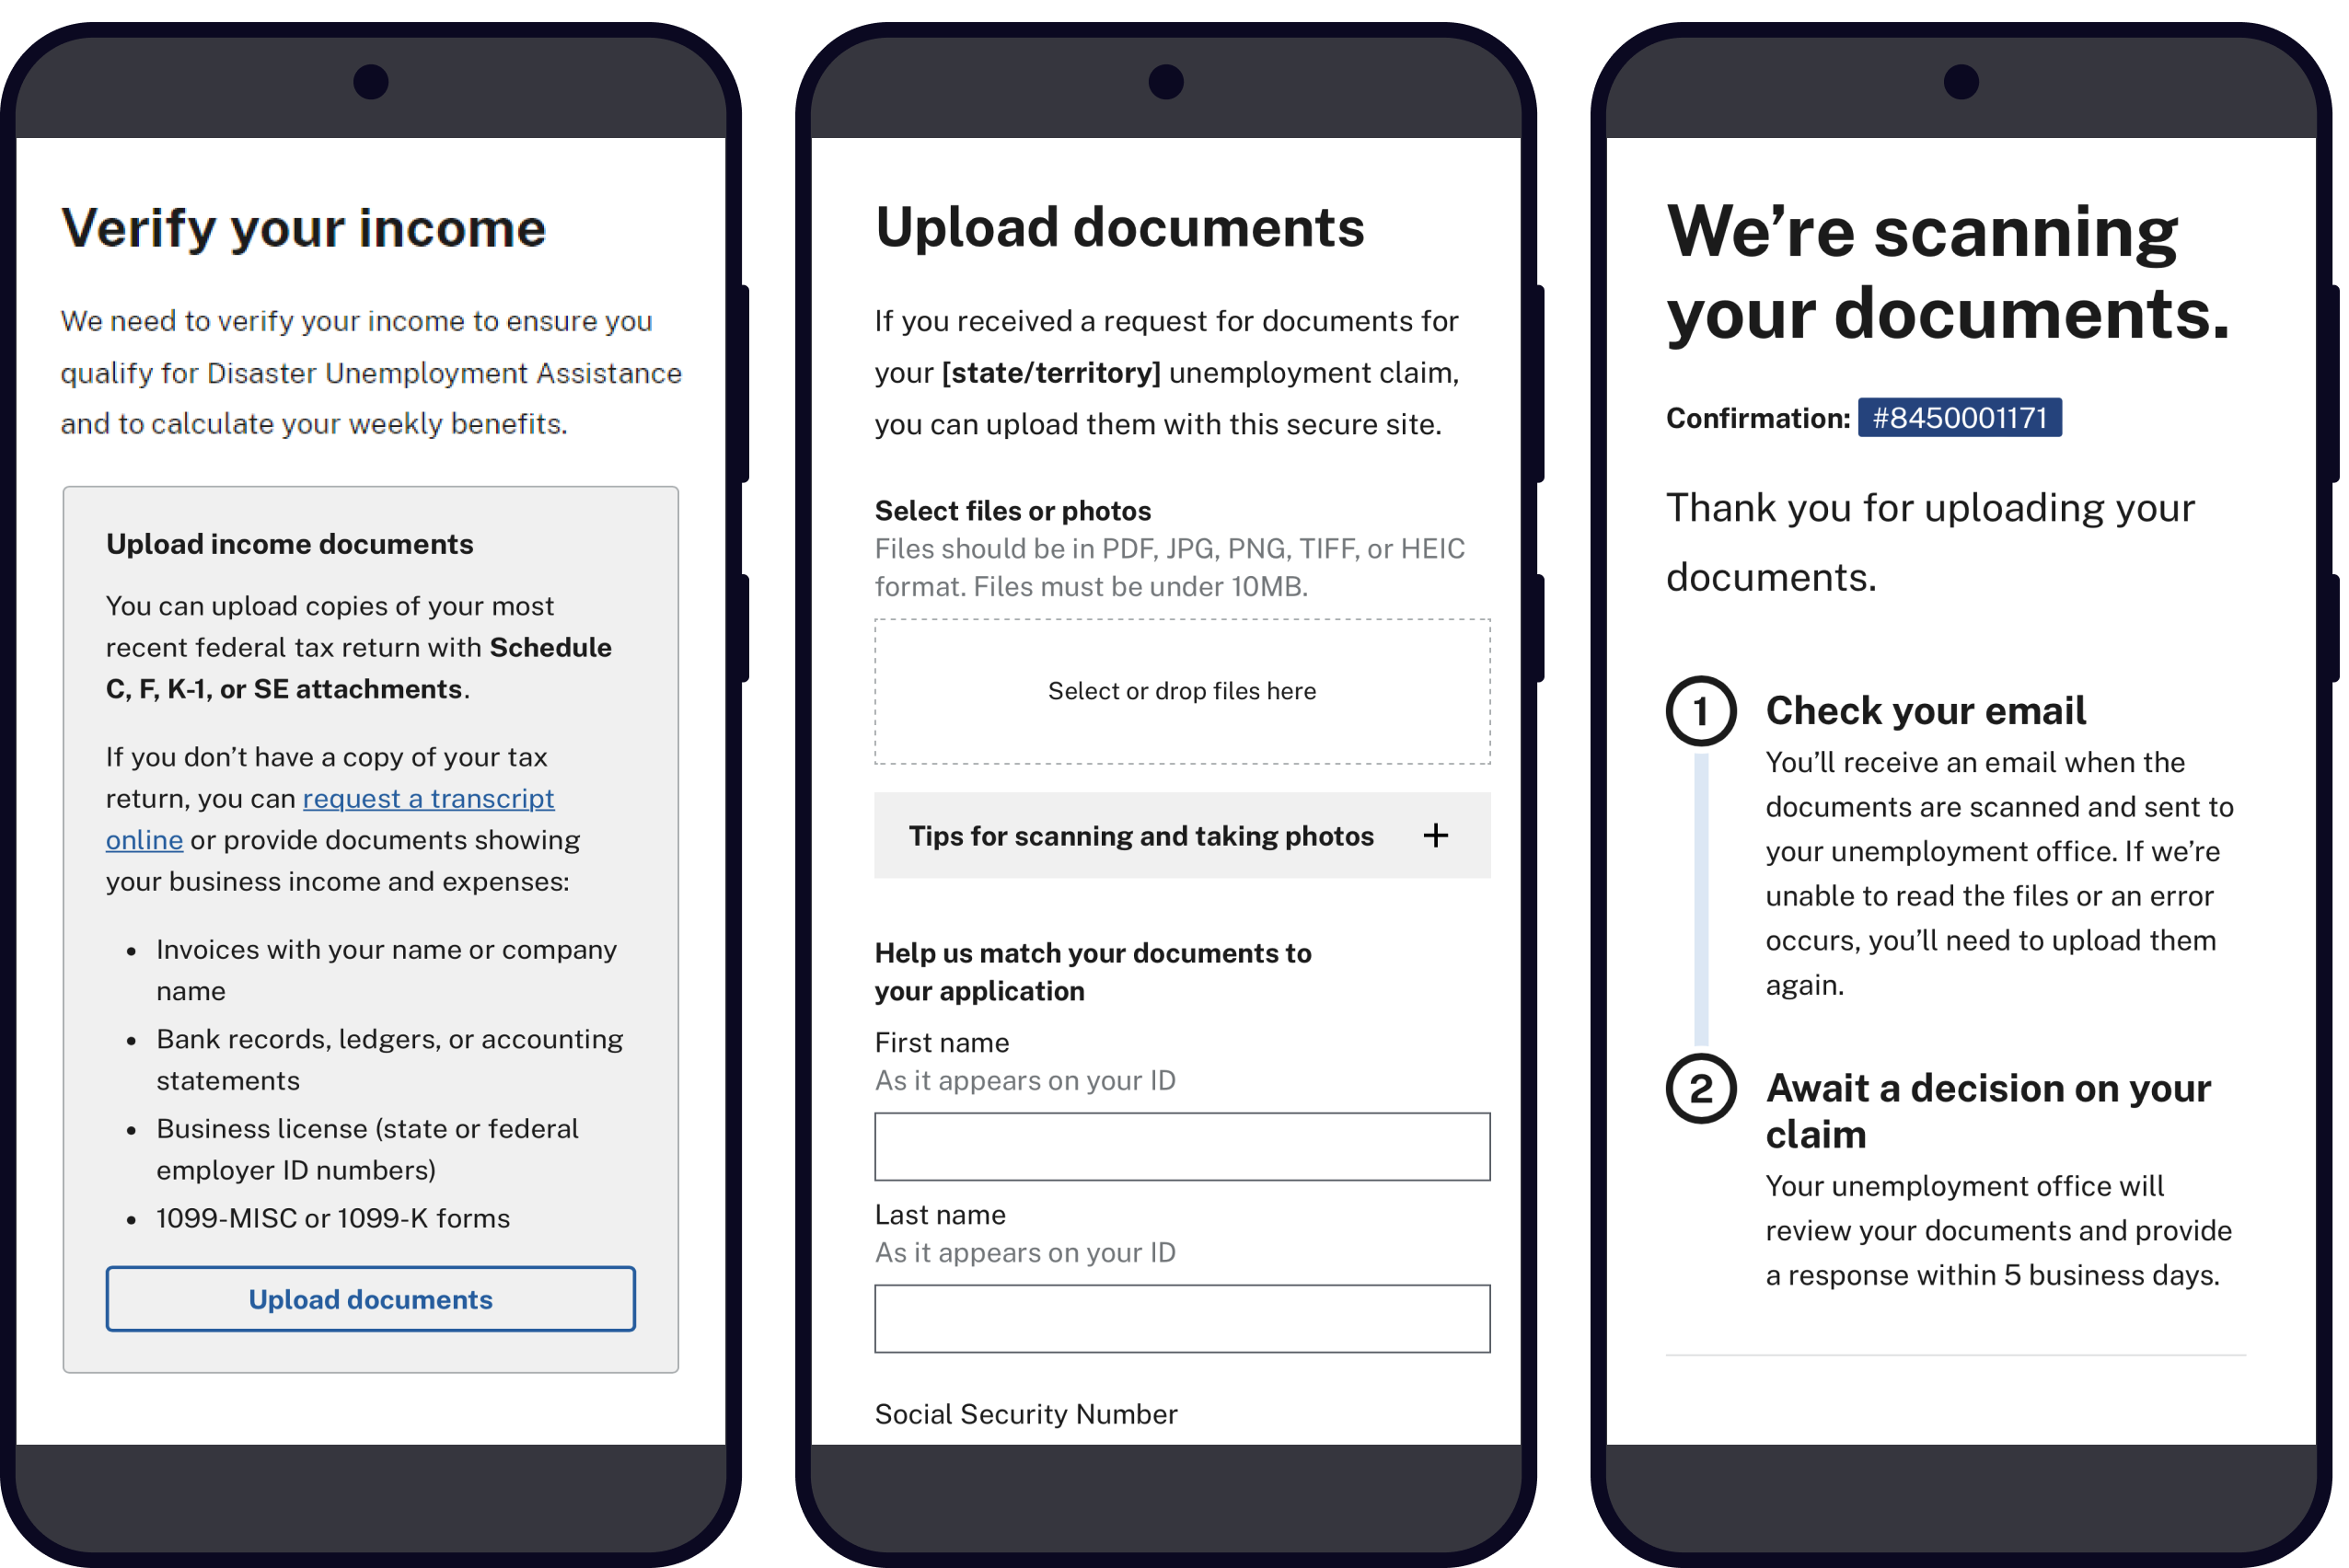 Screenshots requesting income verification documents as part of an unemployment claim 